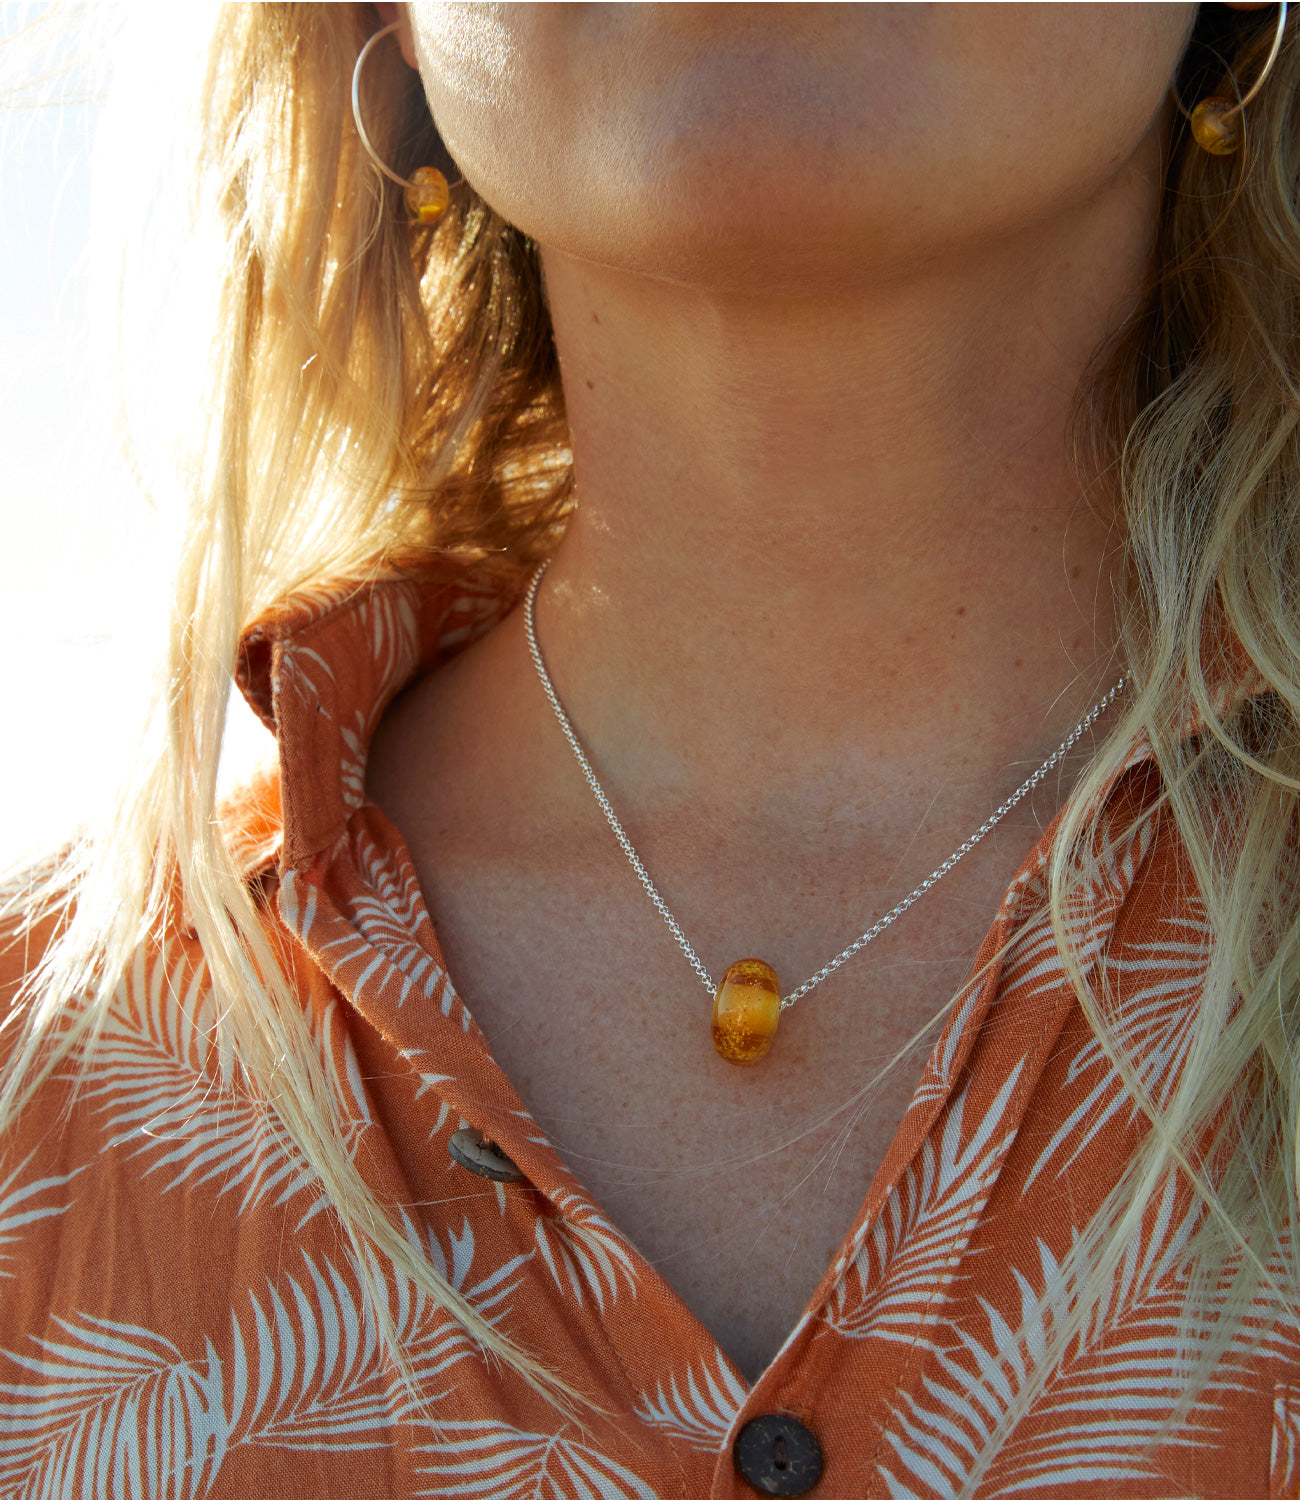 Girl on beach wearing amber glass sand bead necklace and earrings.